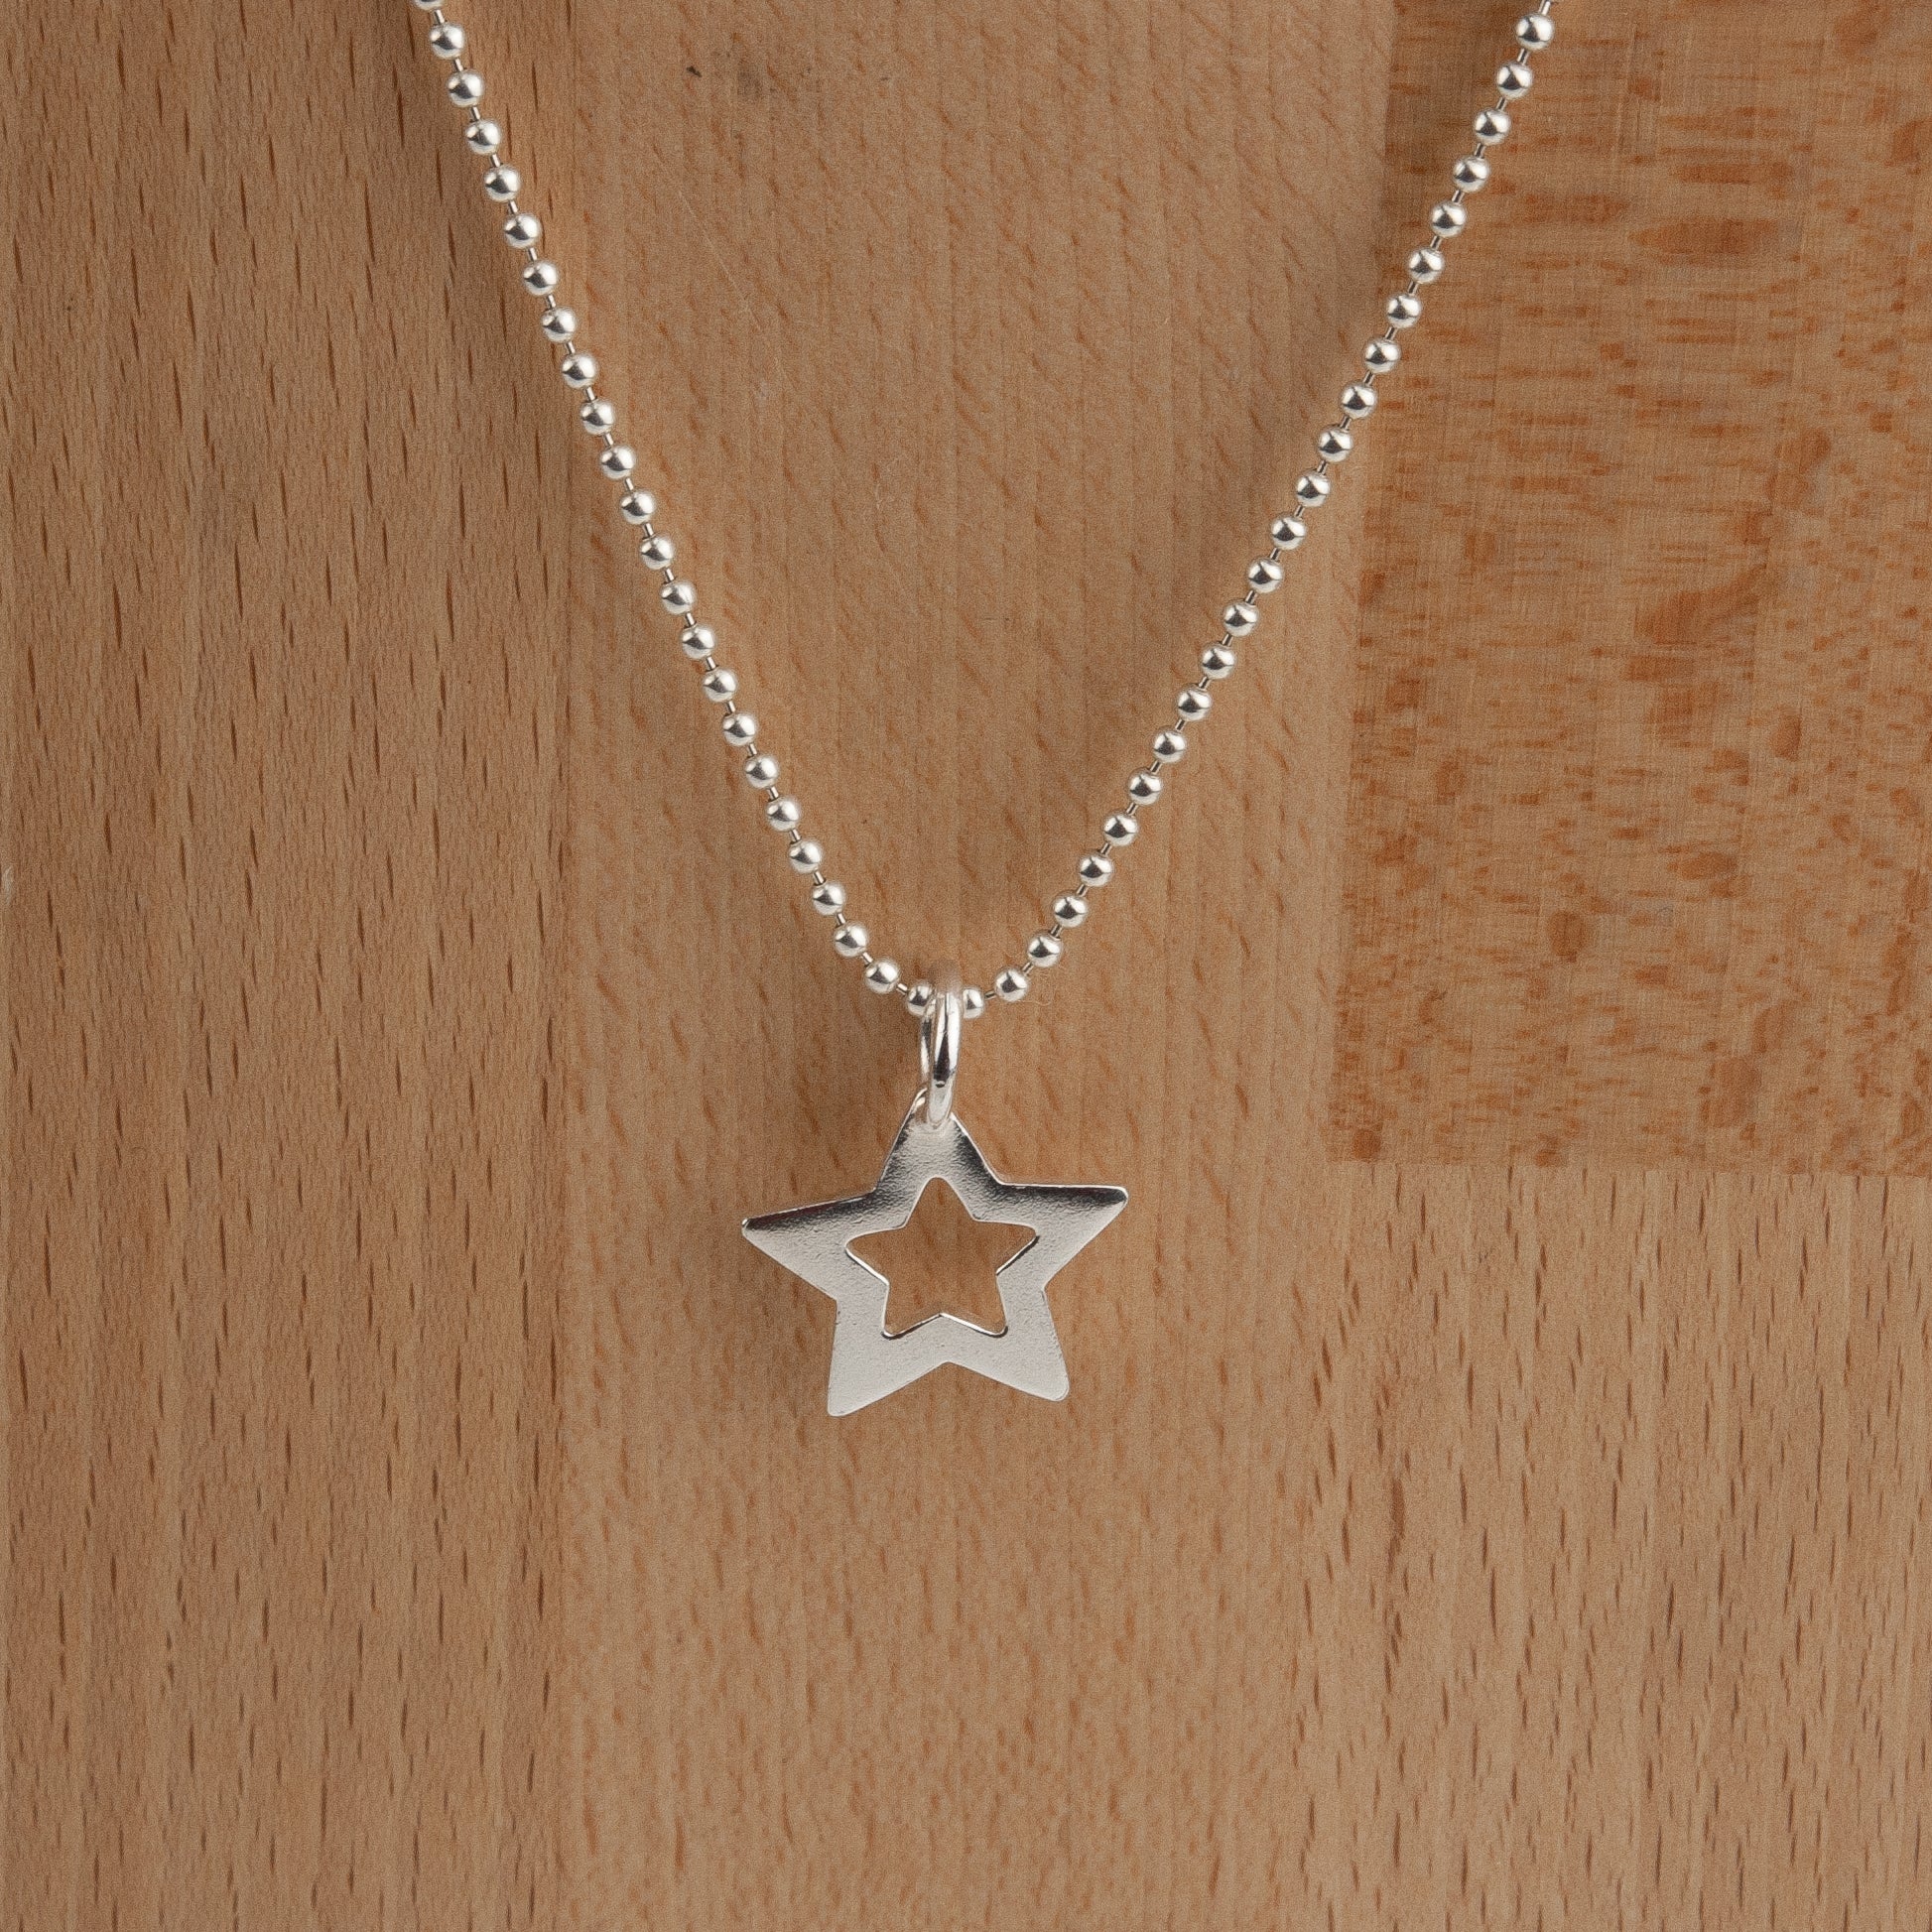 Belle & Bee sterling silver open star necklace